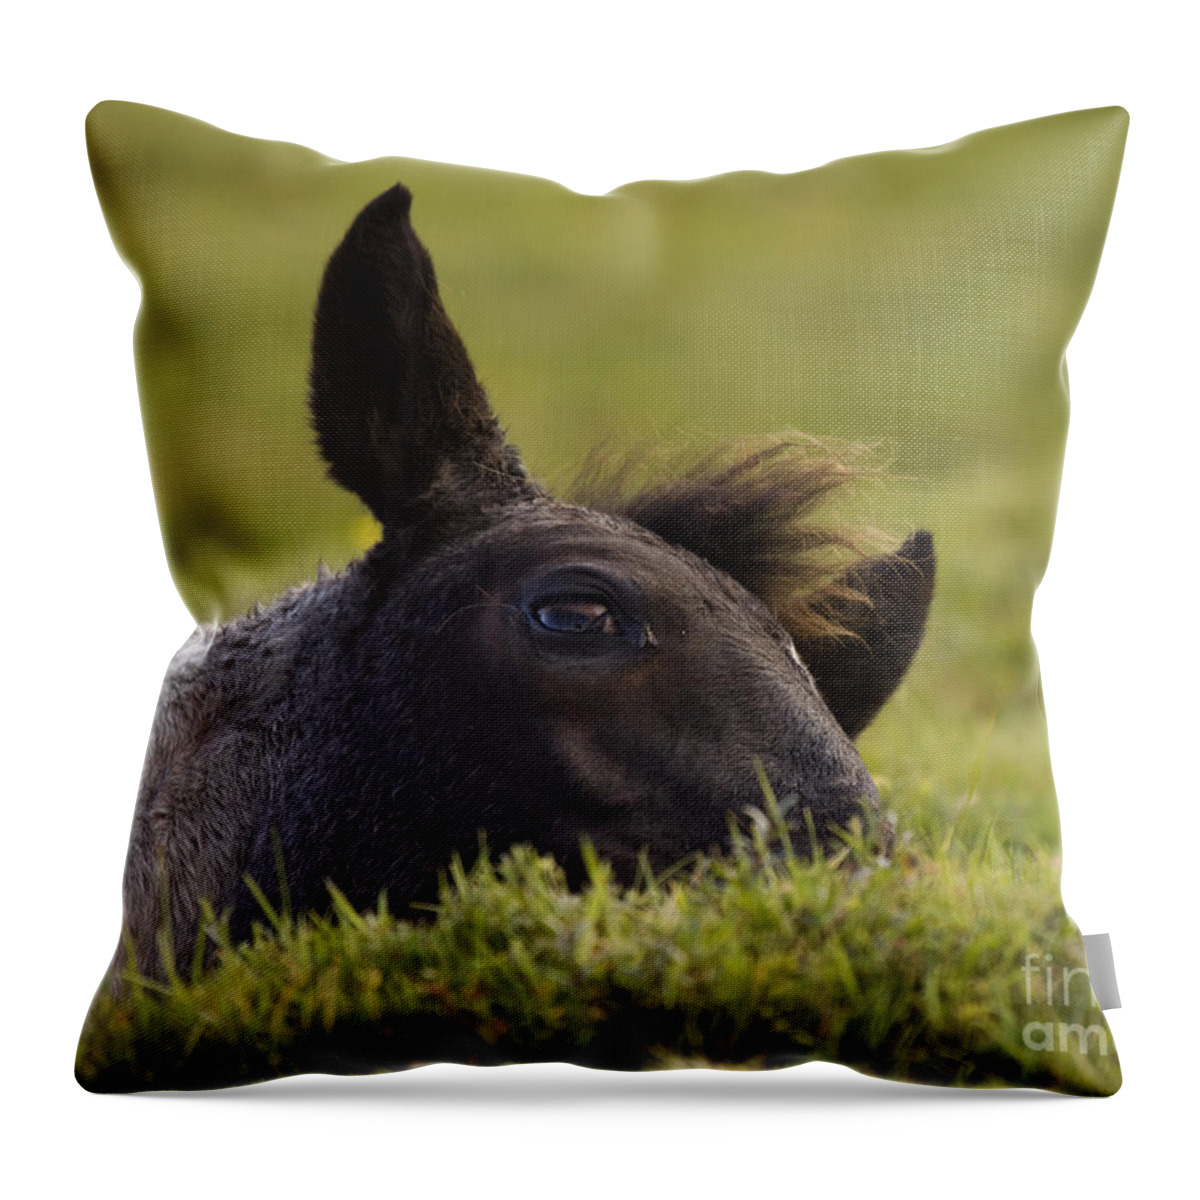 Pony Throw Pillow featuring the photograph Having A Nap #1 by Ang El